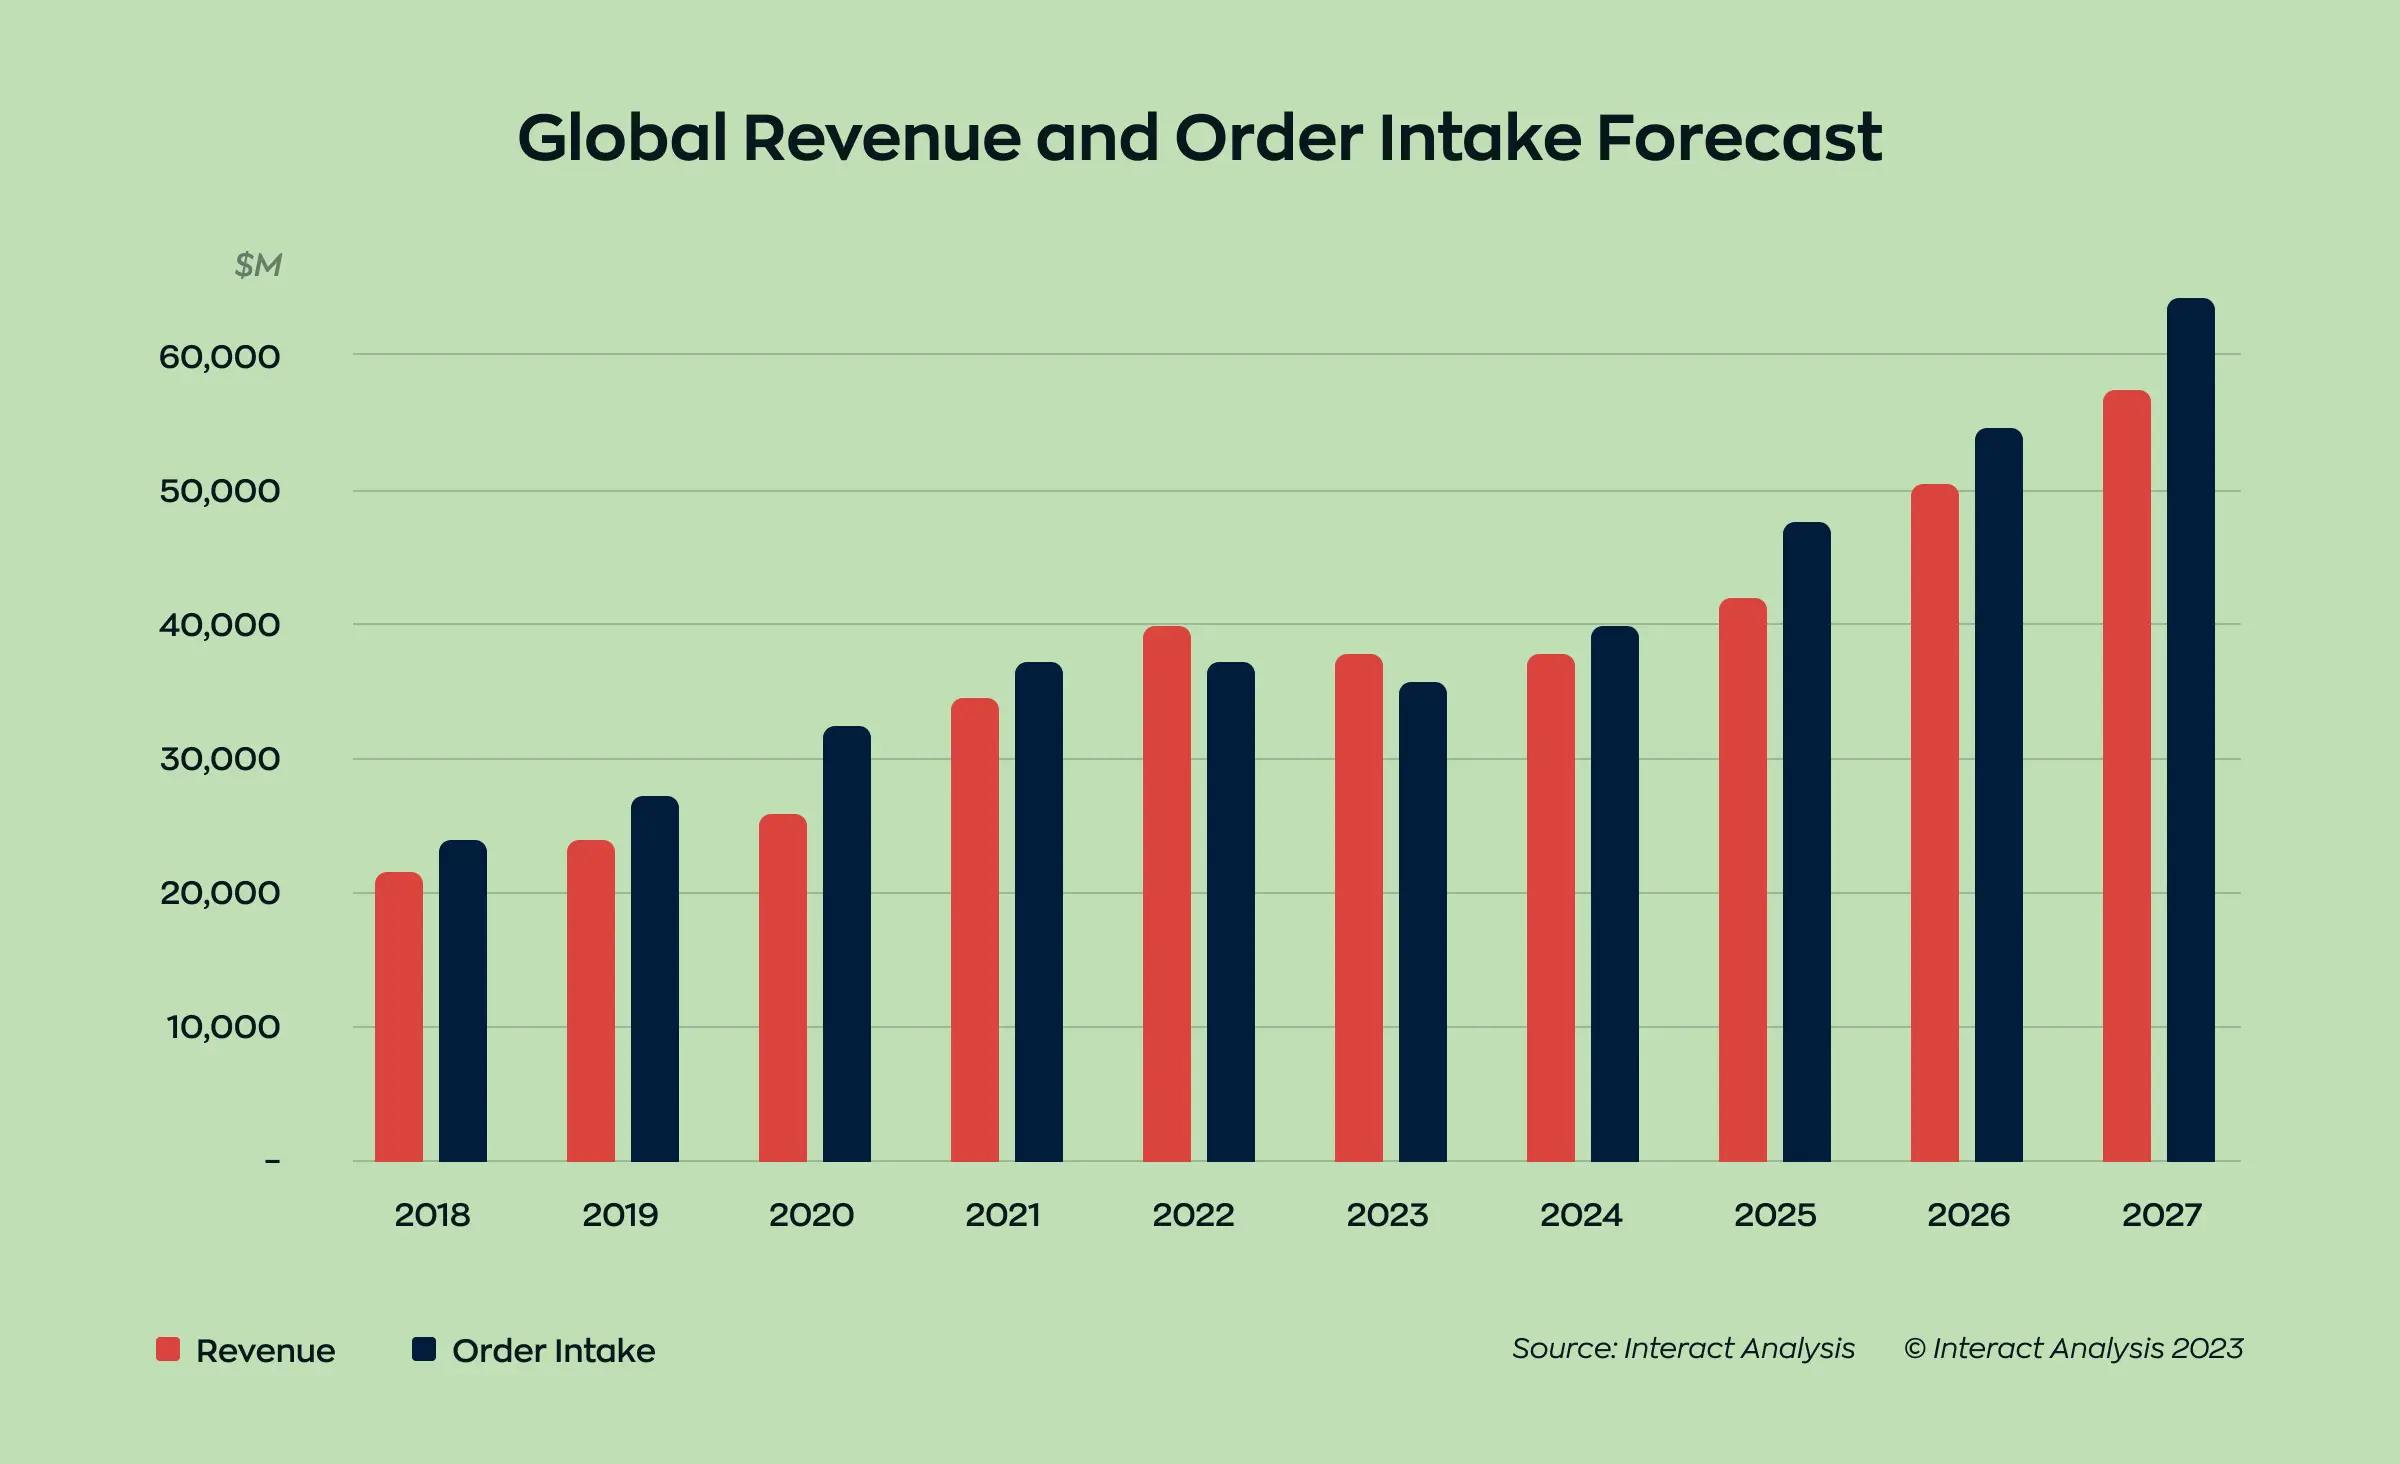 The image illustrates the forecast for global revenue and order intake in the warehouse automation process. It is projected to rise from around $40,000M in revenue and order intake to approximately $60,000M in 2027.